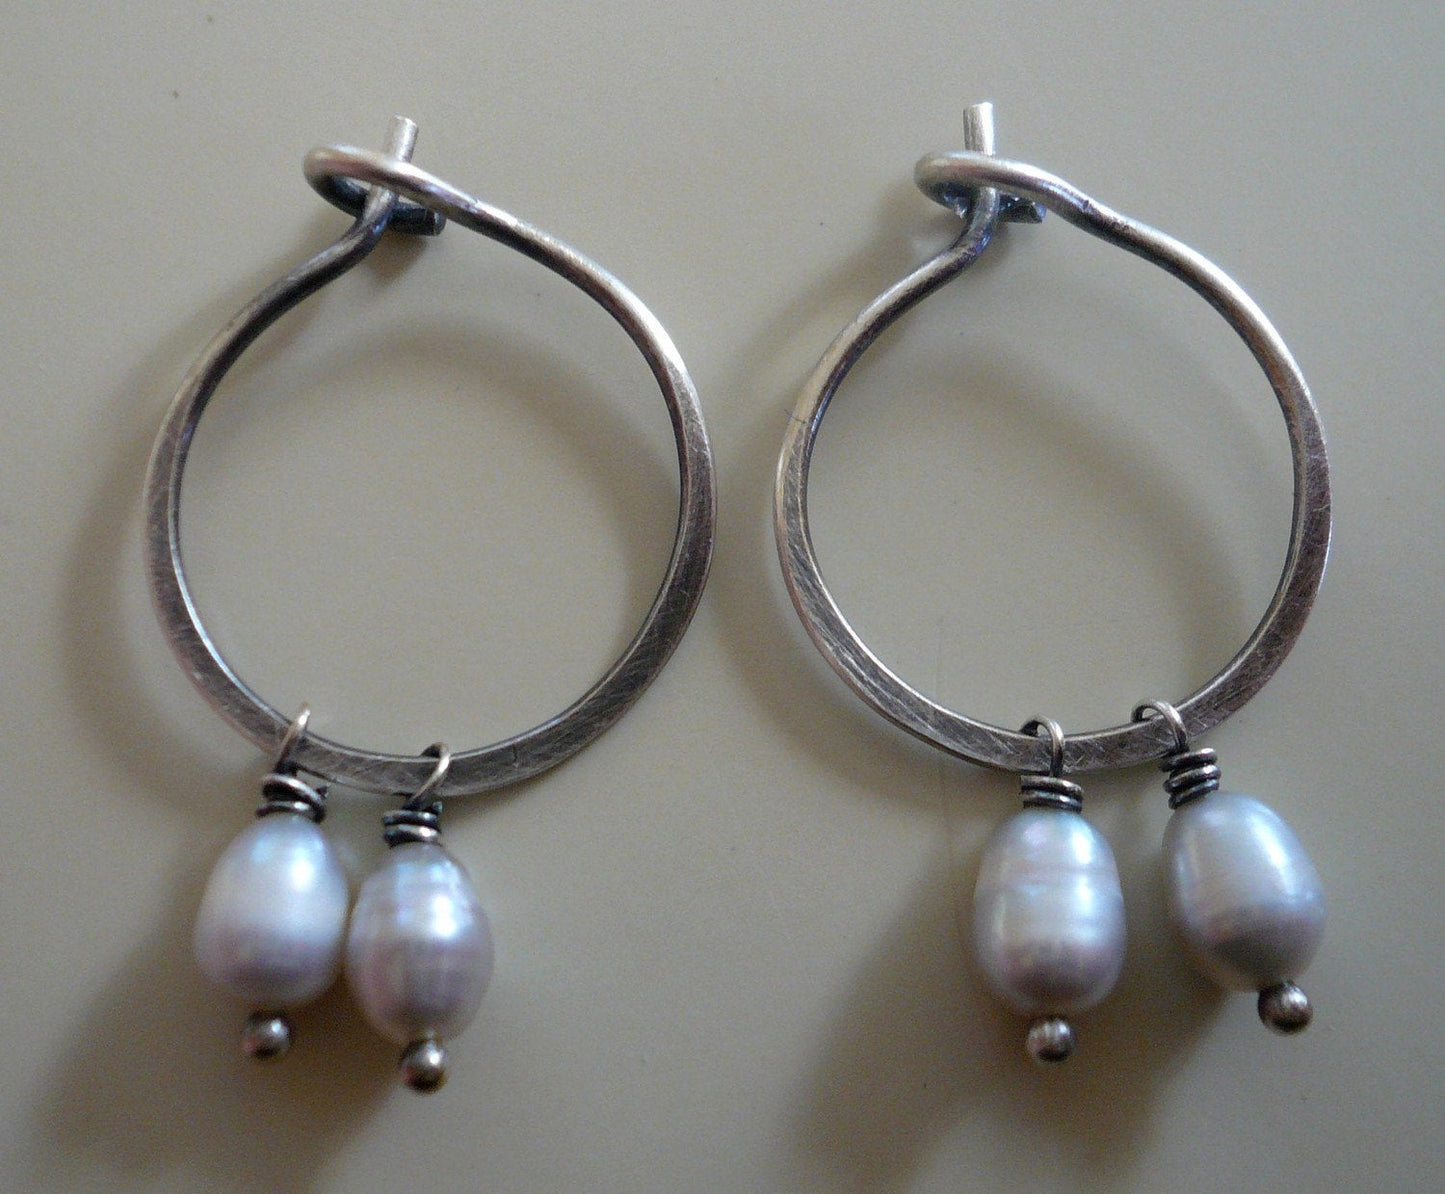 Harmony Hoops. Handmade. Oxidized & polished Sterling Silver. Pearls